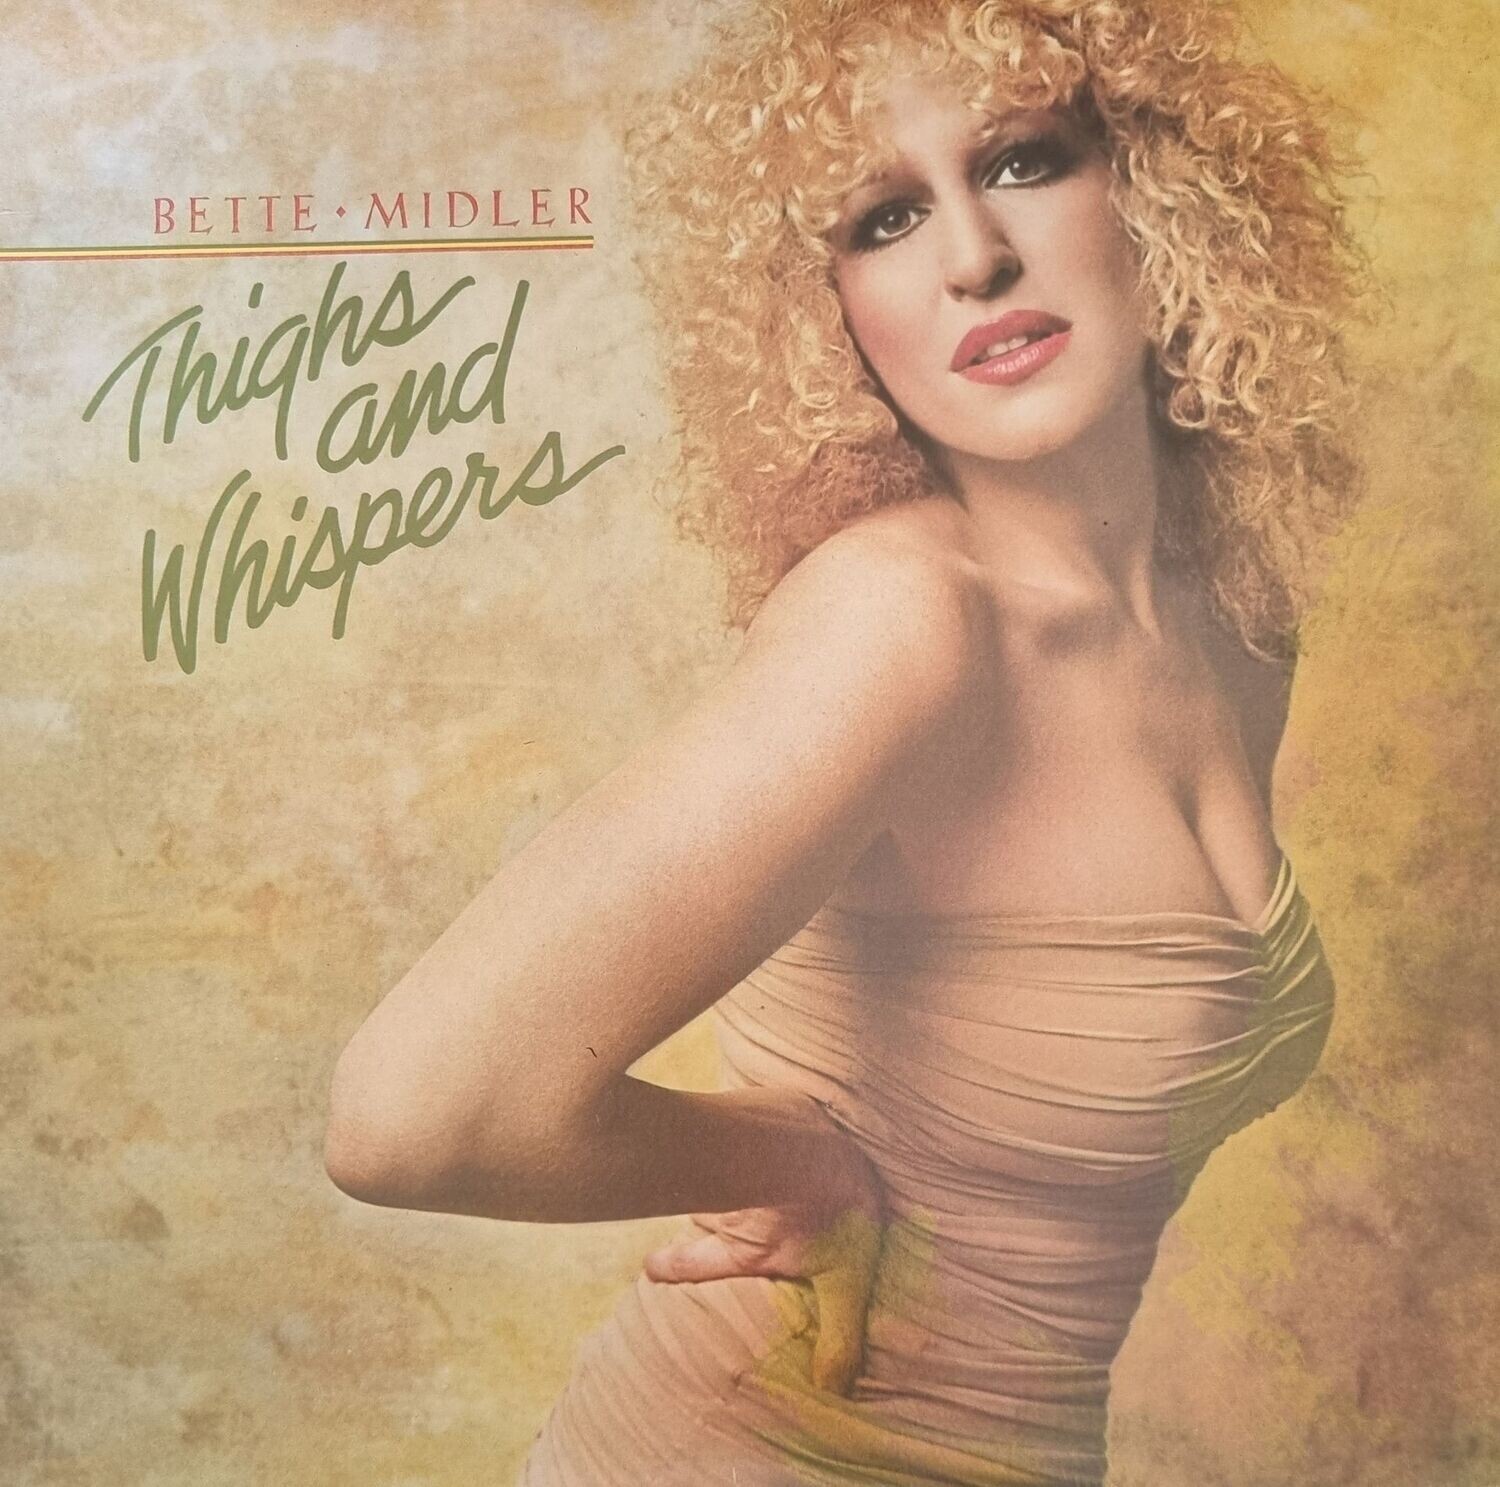 Bette Midler – Thighs And Whispers (1979) (US Pressing)